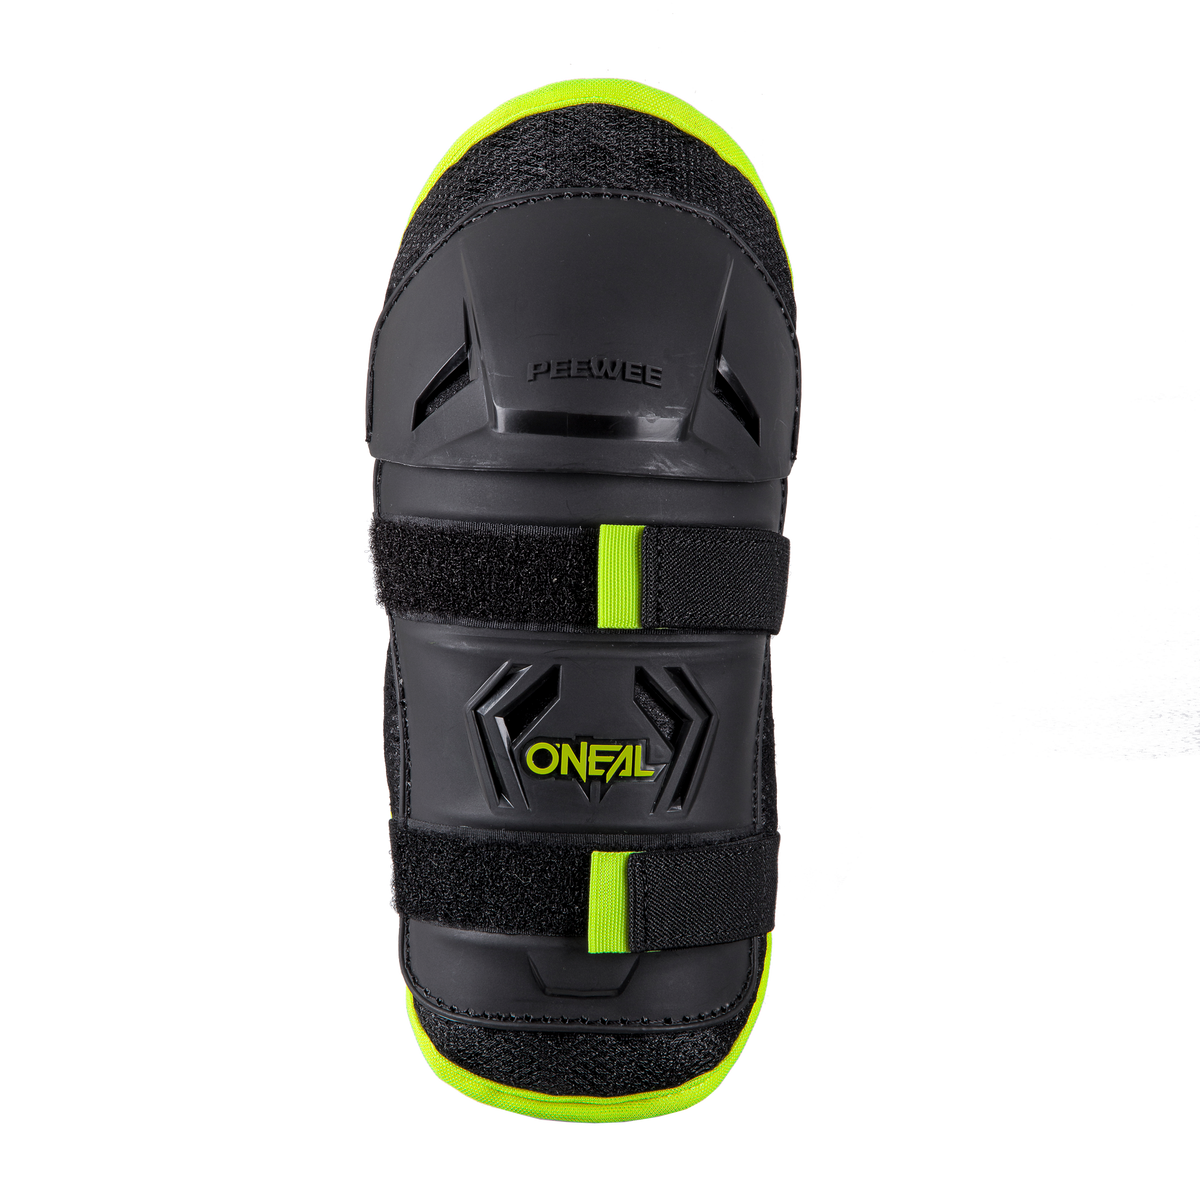 https://cdn.oneal.eu/assets/importedProductImages/PROTECTION/YOUTH/KNEE/PEEWEE/neon%20yellow/2019_ONeal_PEEWEE_Knee_Guard_neon%20yellow.png